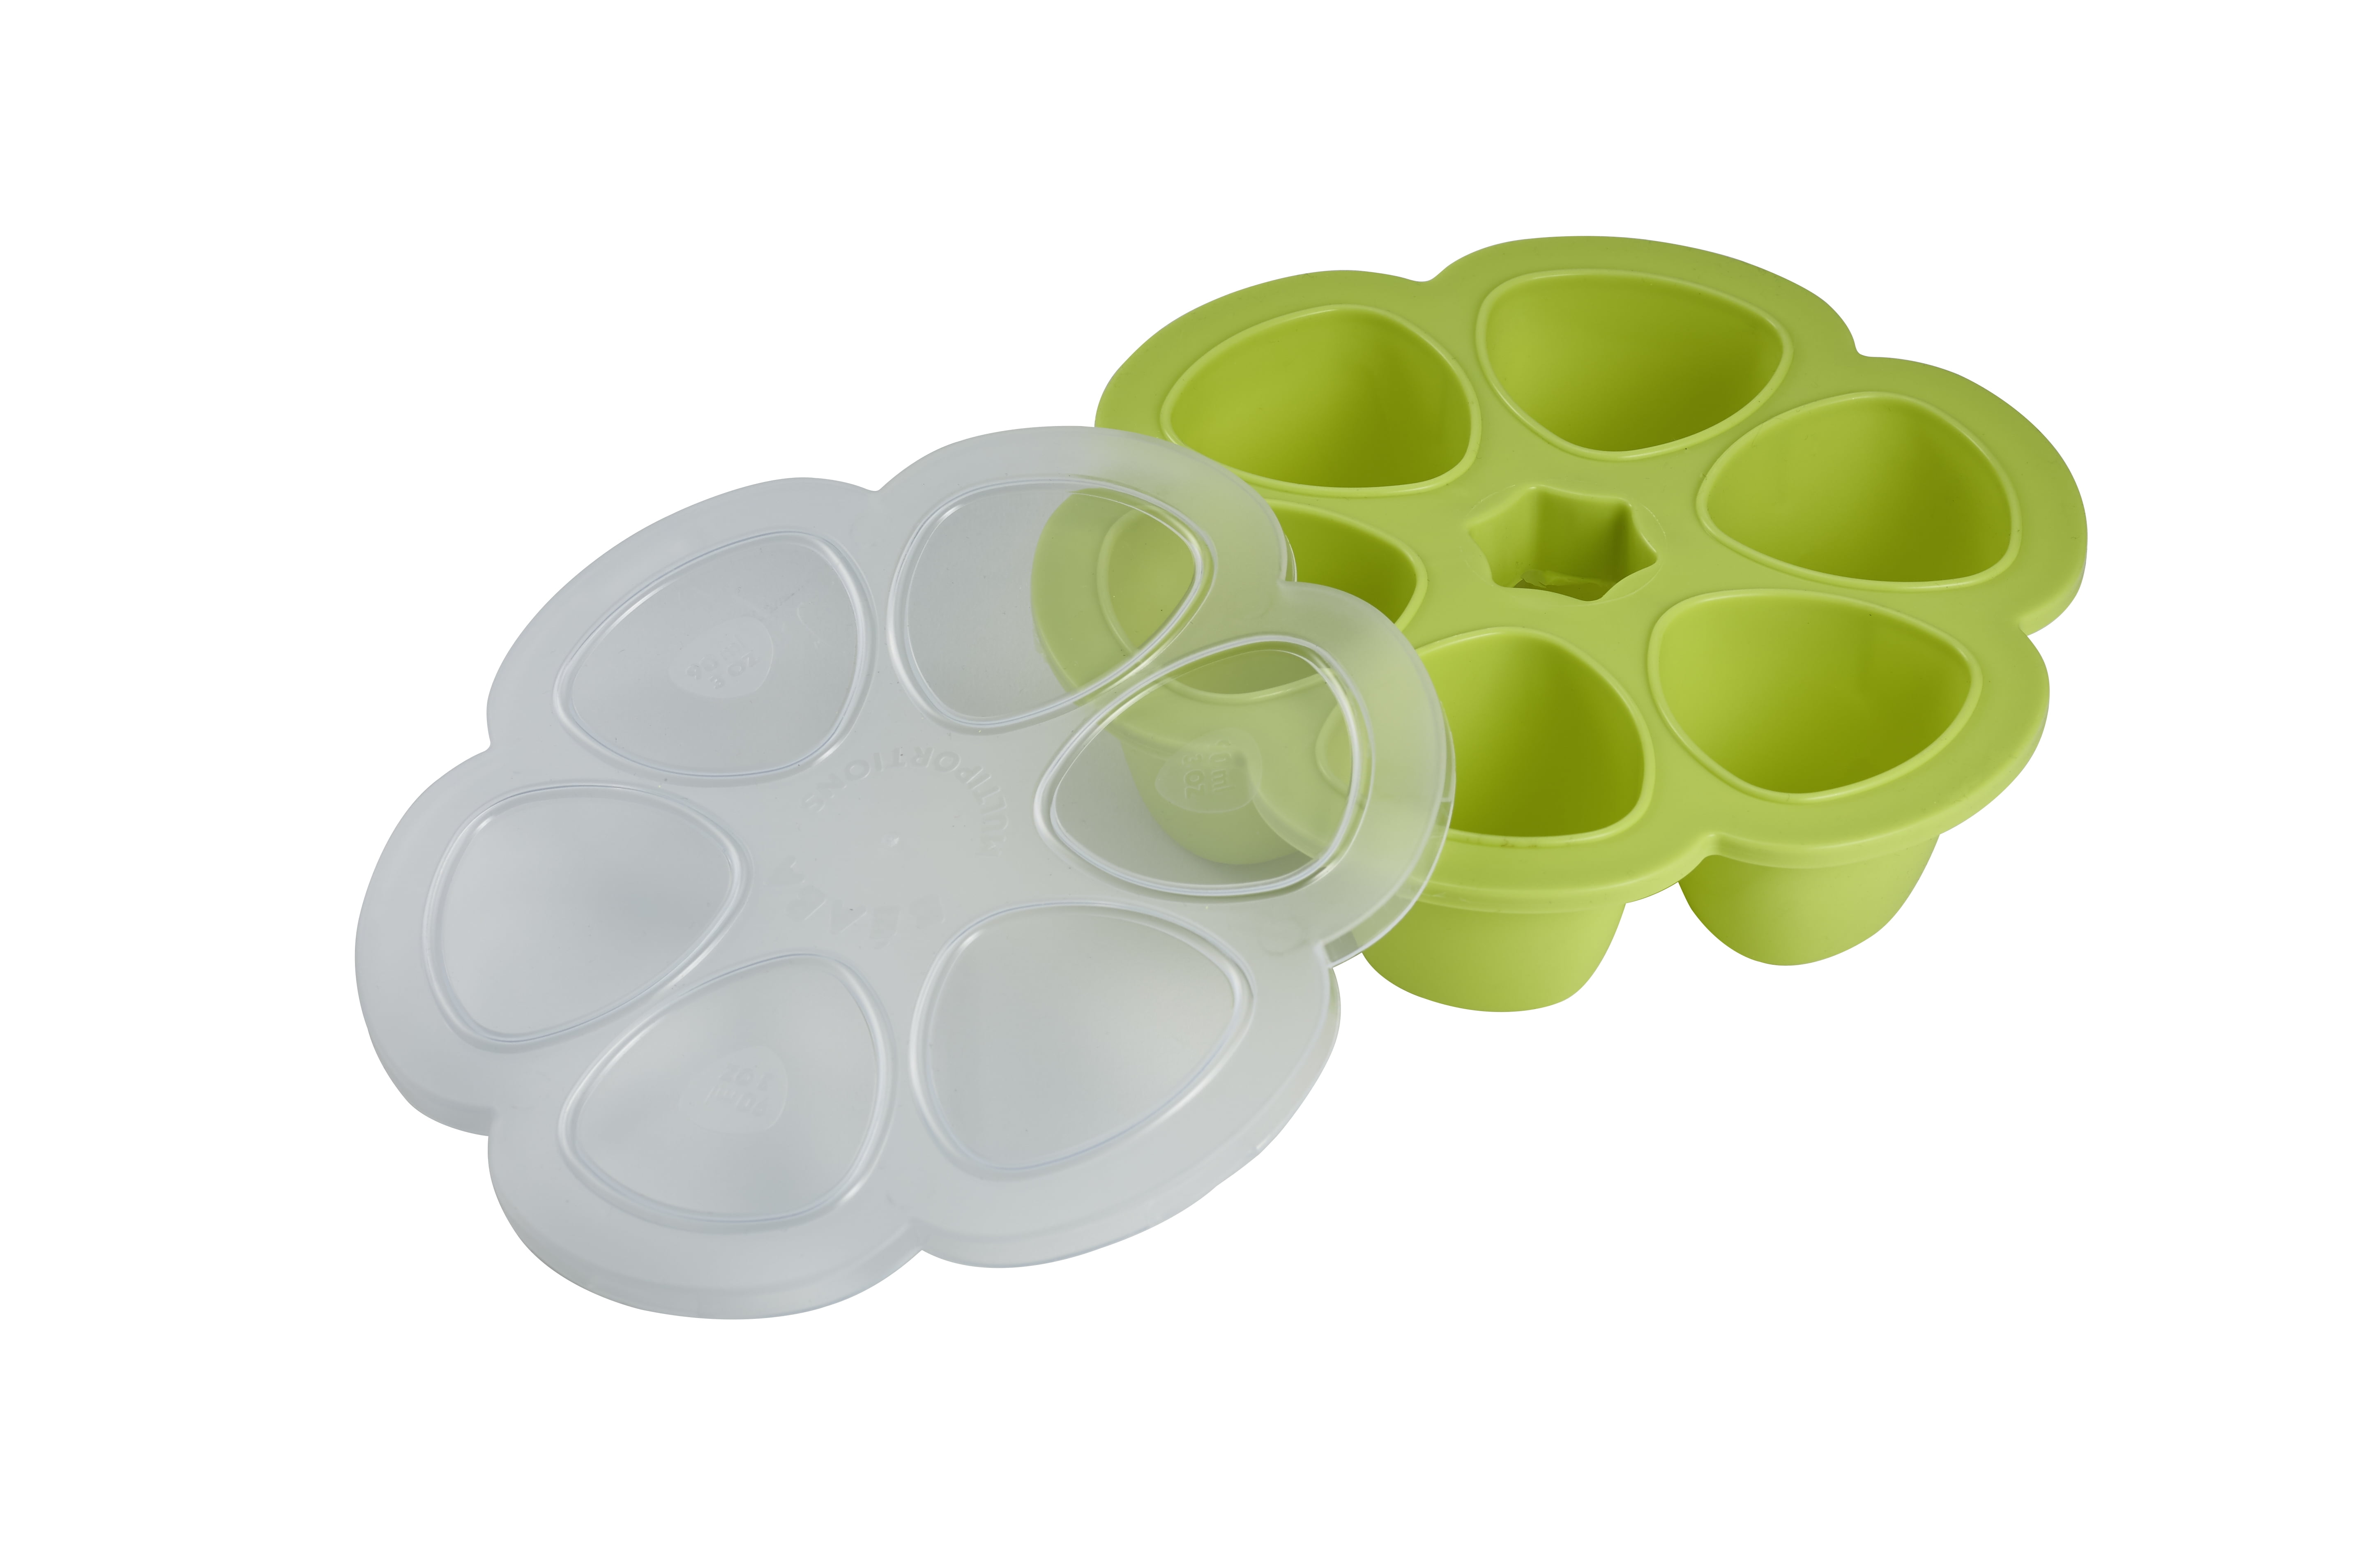 BEABA Multiportions Silicone Baby Food Tray / Container (Orange)